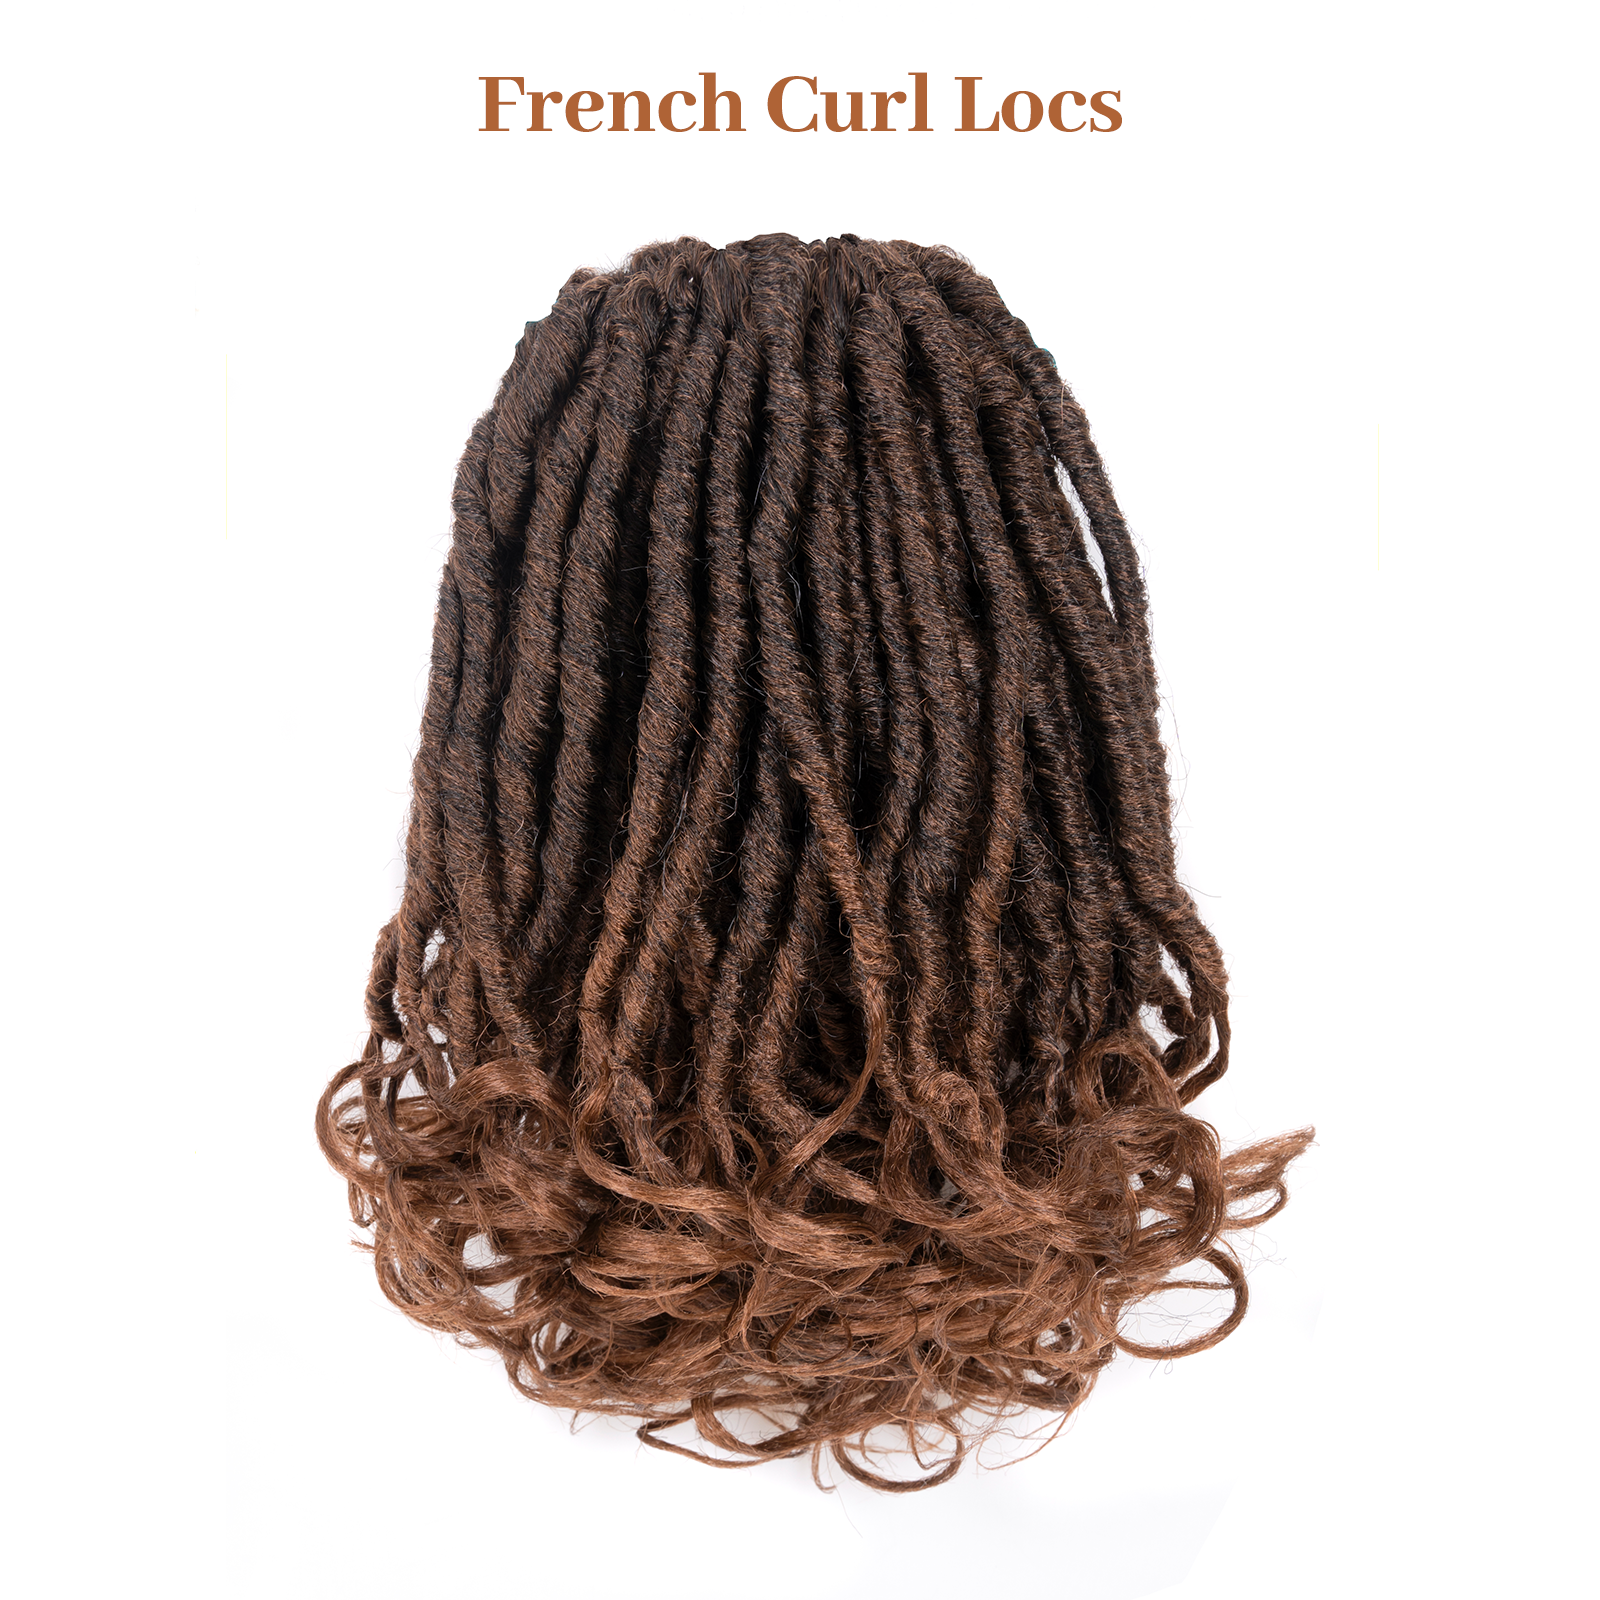 Toyotress Unique French Curl Locs Crochet French Locs With Curly Ends Crochet Hair Pre Looped French Curl Braiding Hair for Women